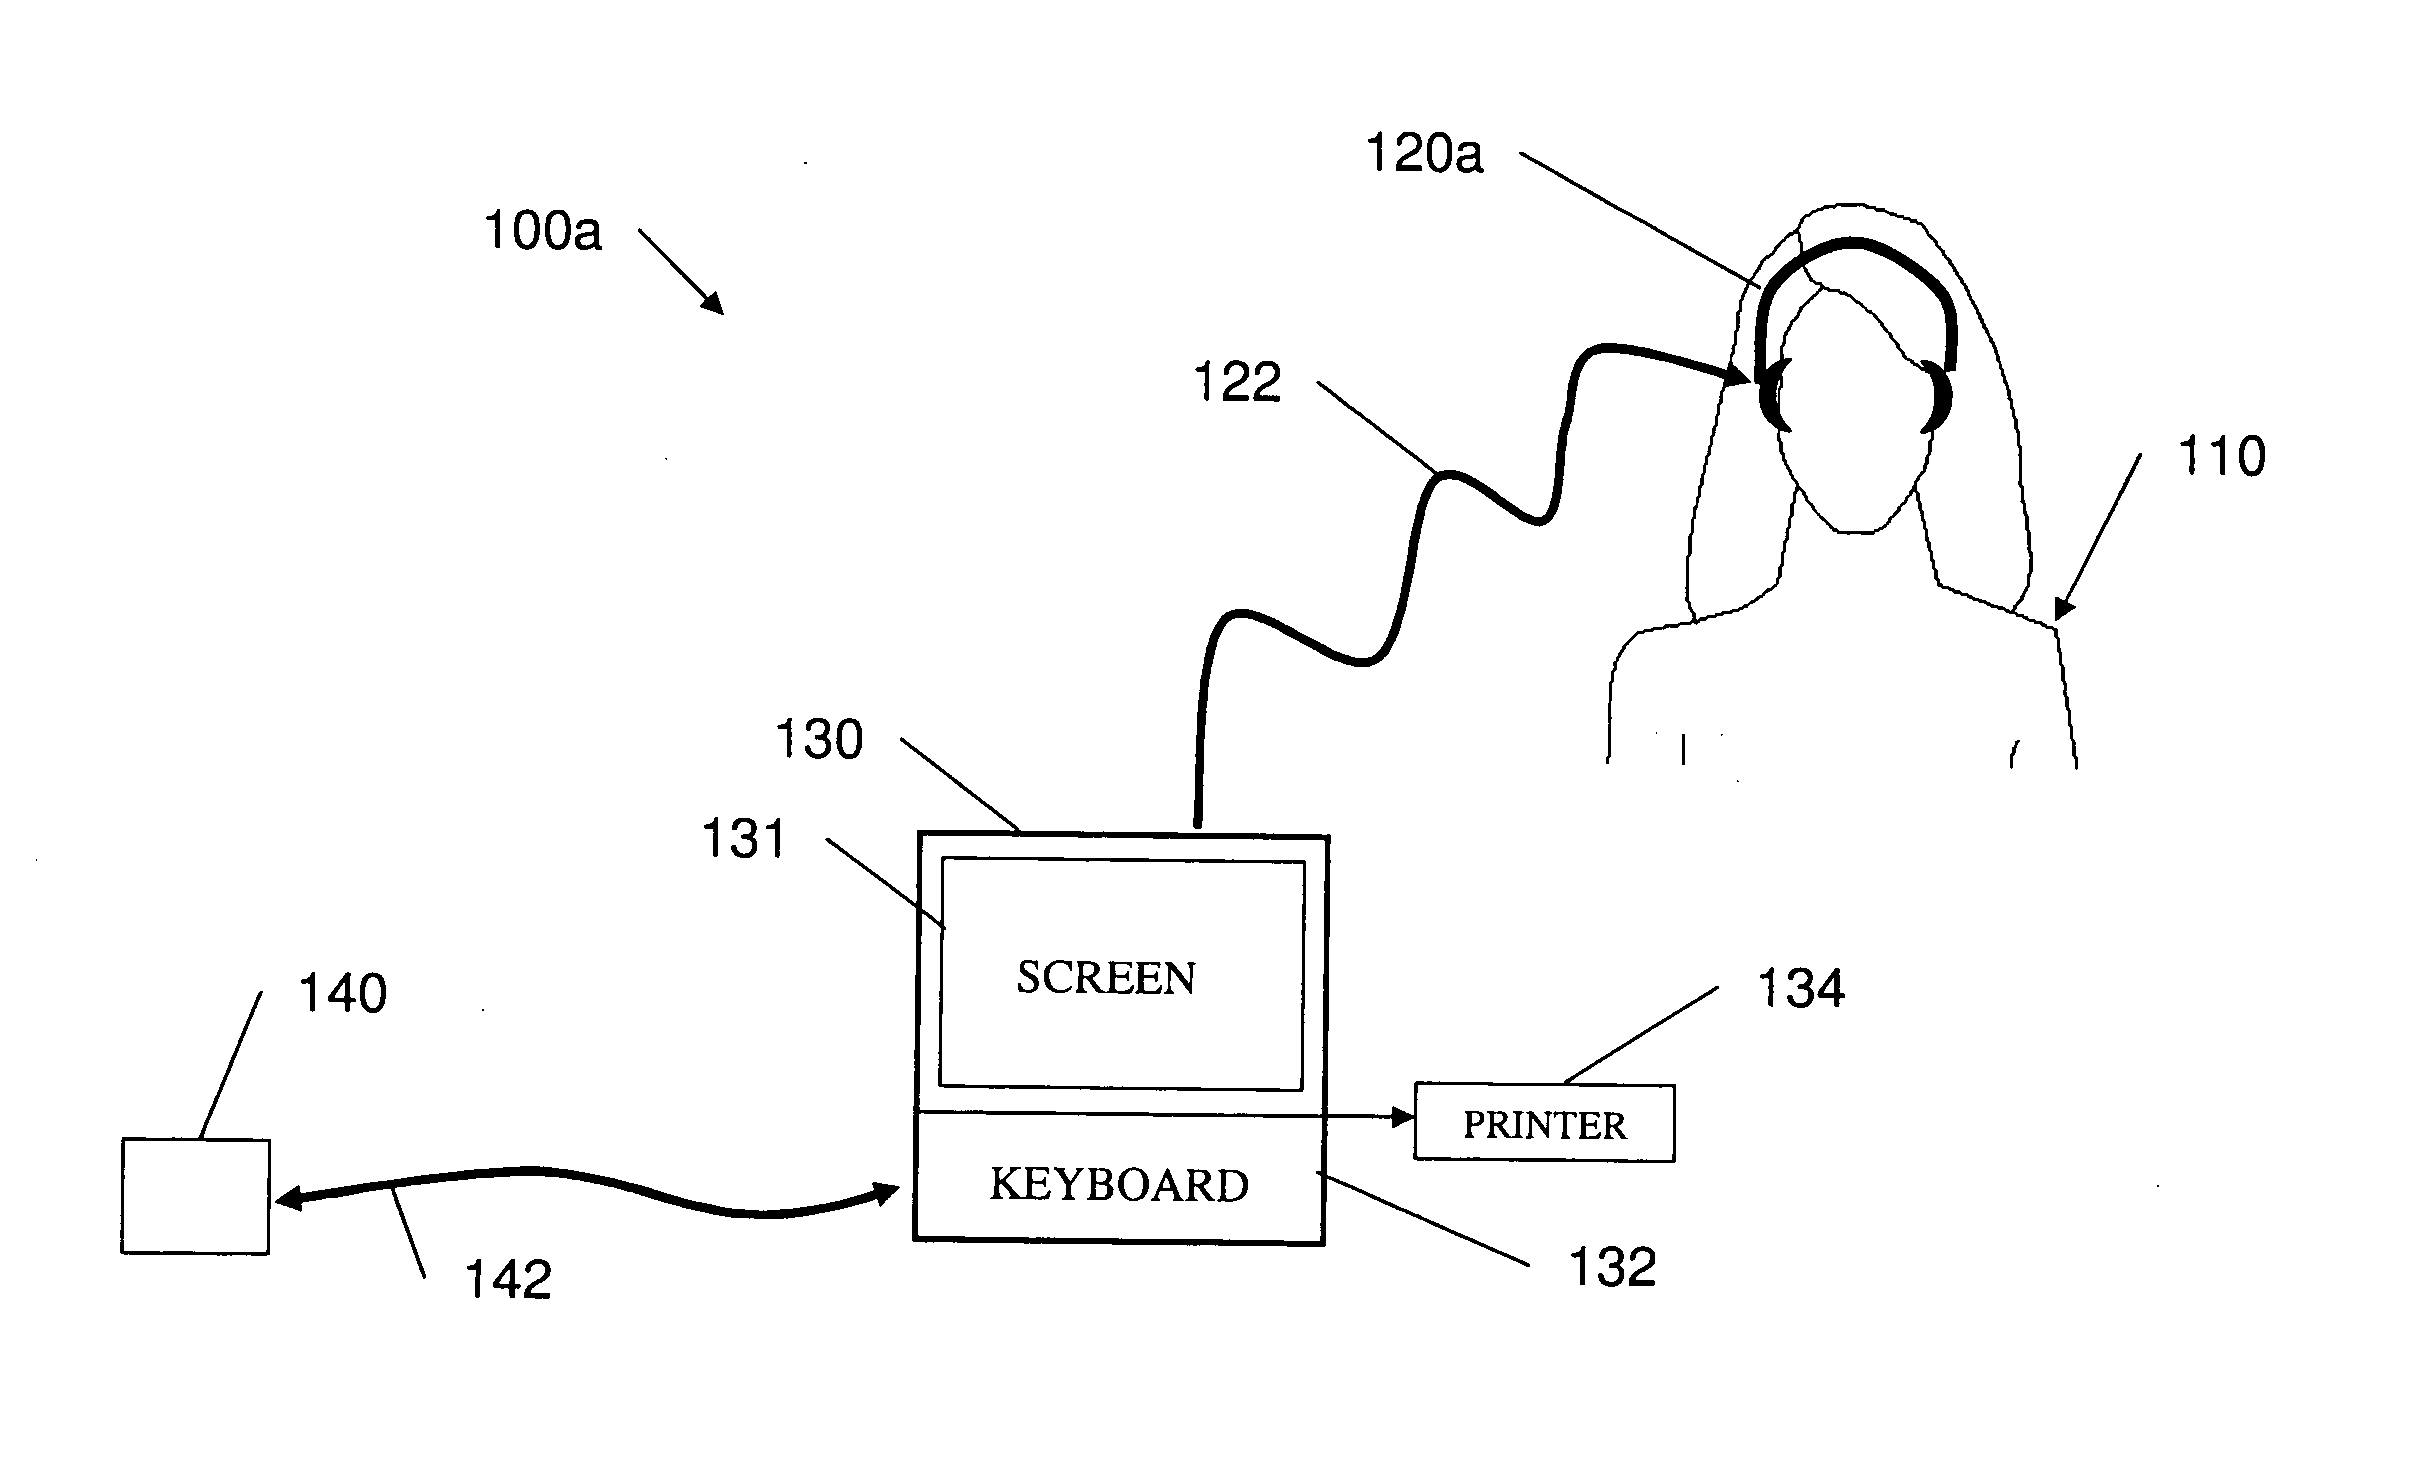 Auditory diagnosis and training system apparatus and method